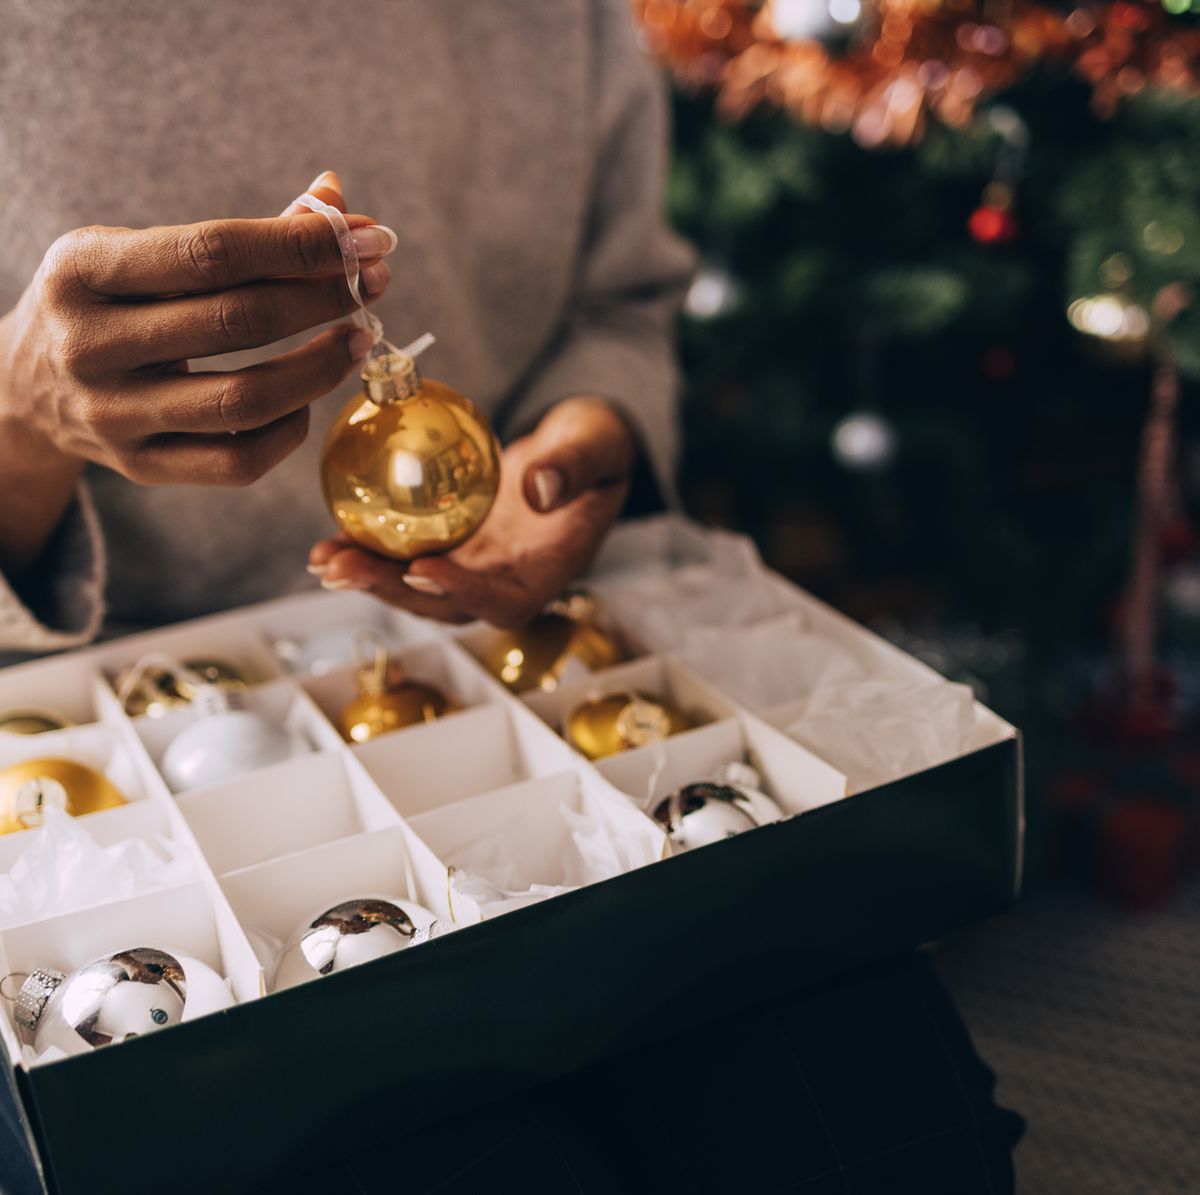 How to Store Christmas Ornaments: 6 Organizing Tips From Experts